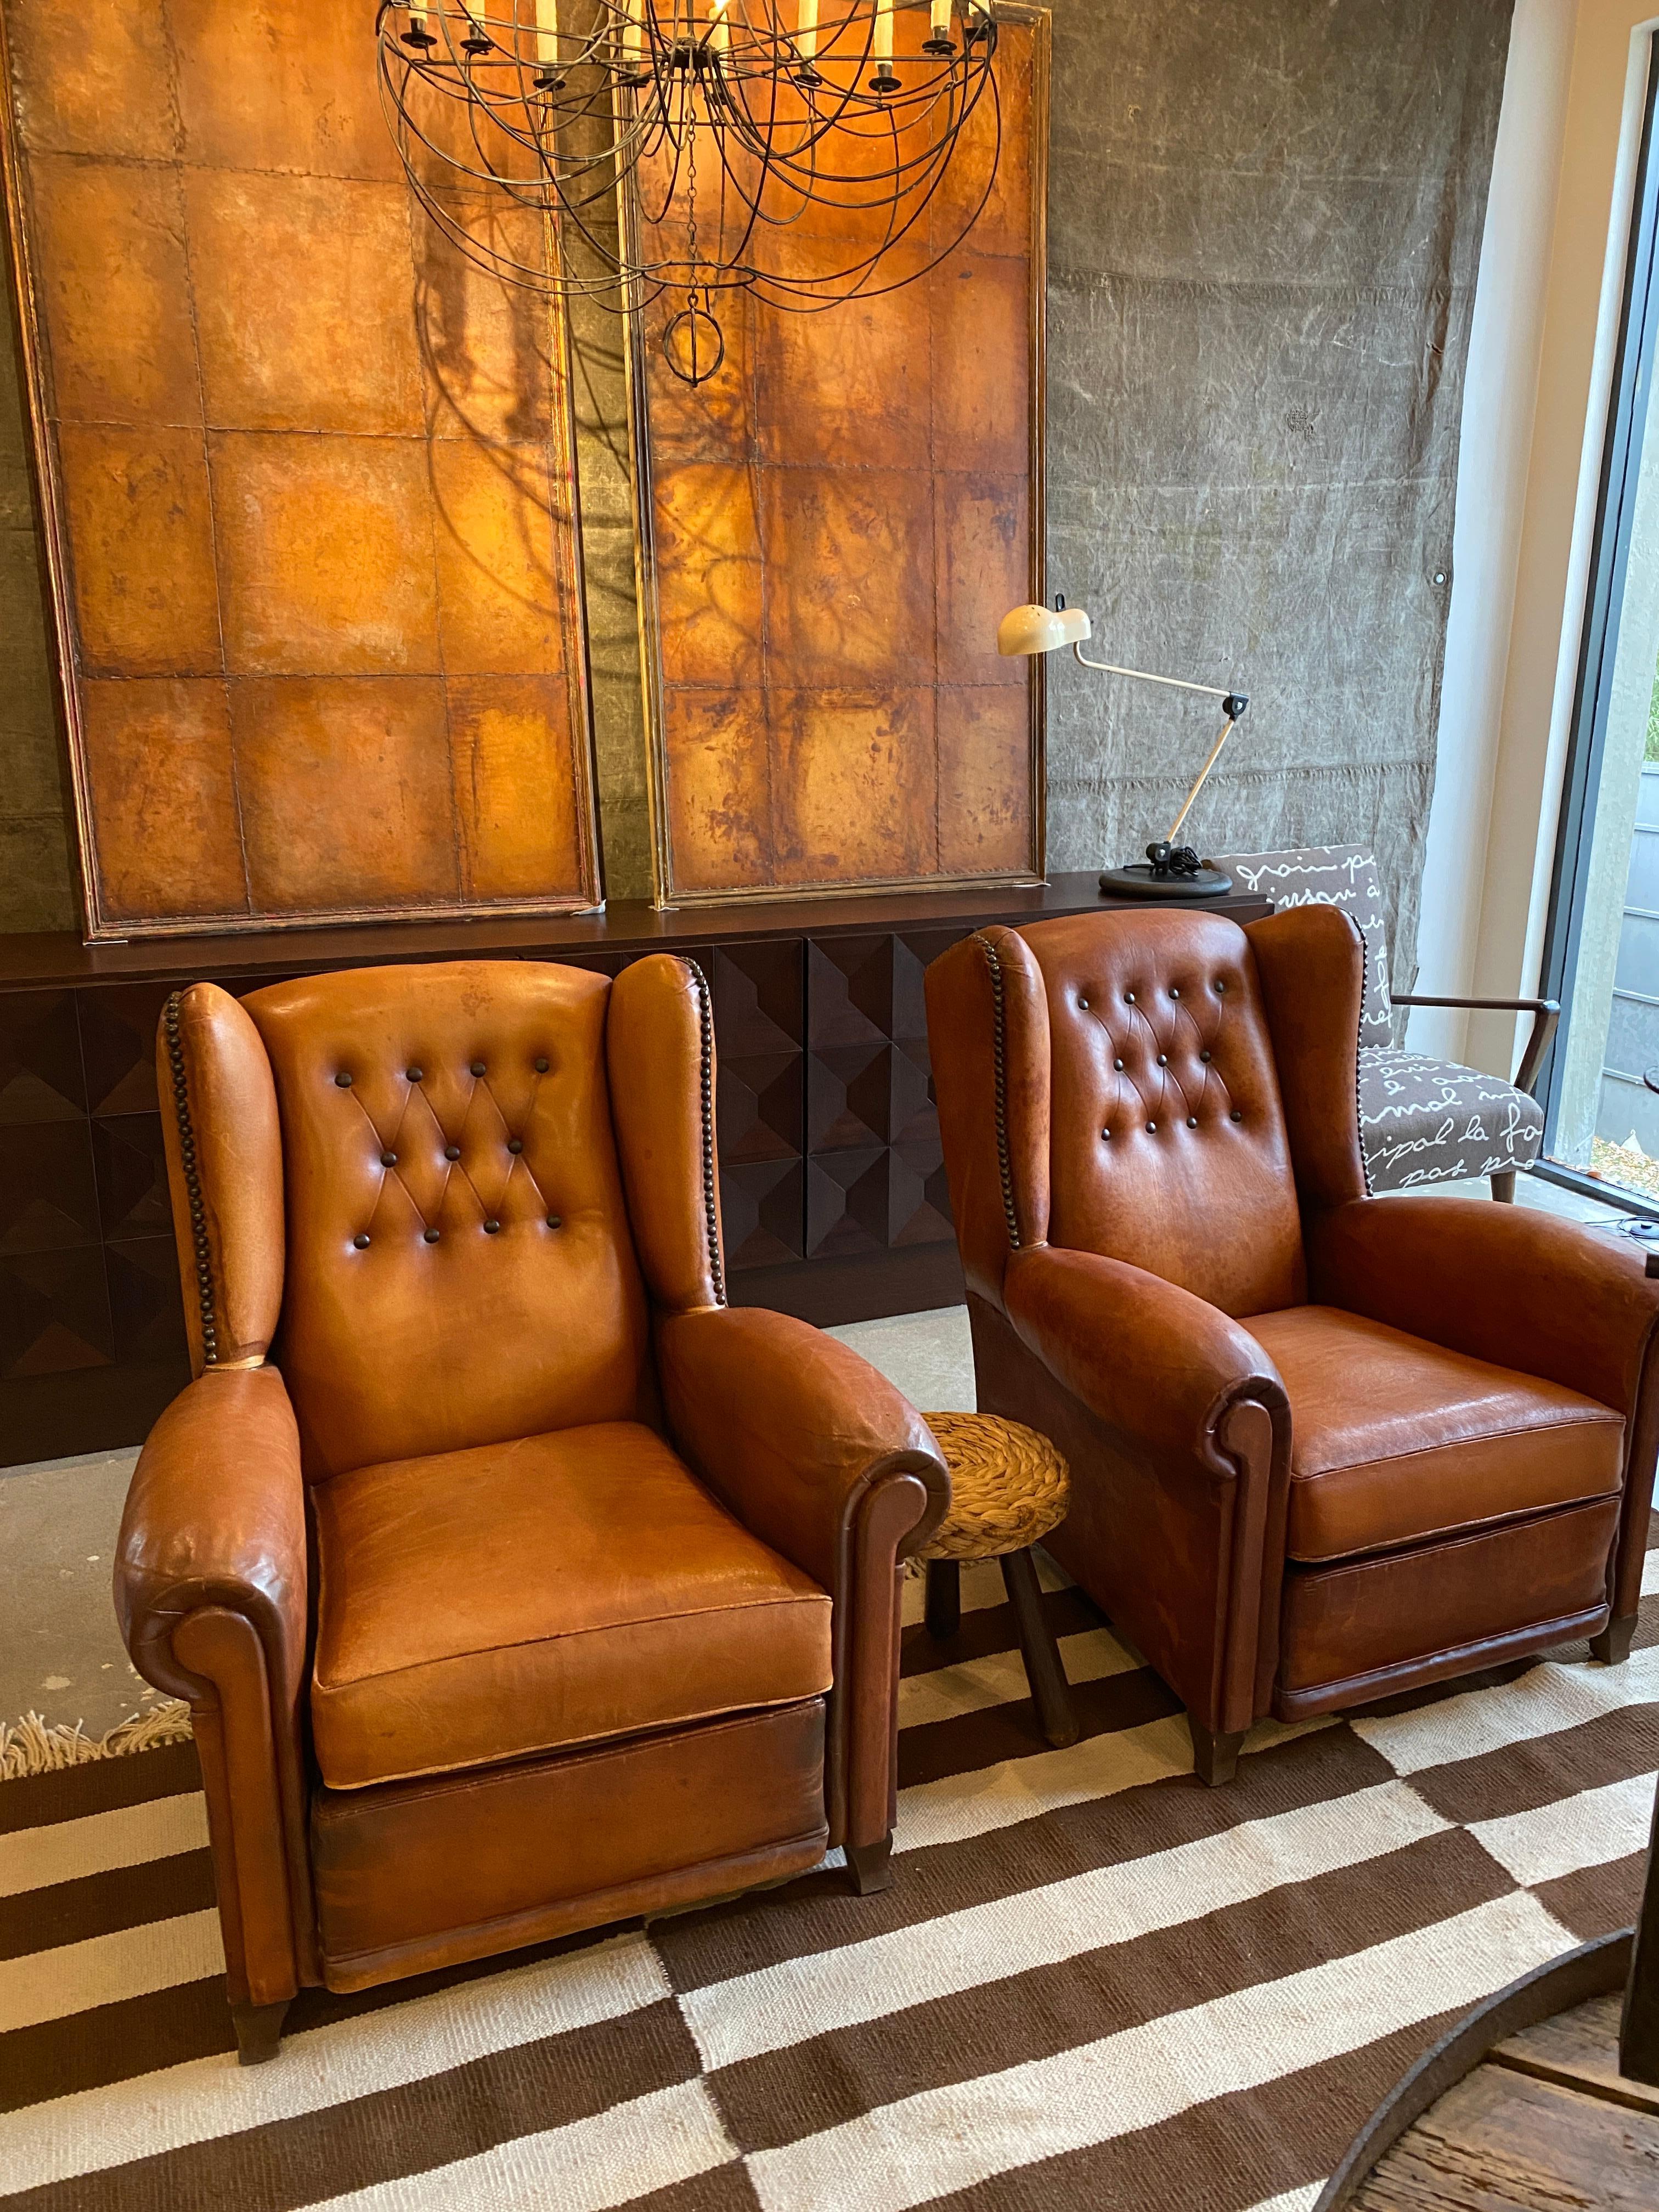 Pair of cognac leather wingback chairs with tufted backs and large nailheads. Nicely matched pair in good condition. Leather has luster, patina and shows some repair. Unusually comfortable and generous scale in comparison to many of the same period.